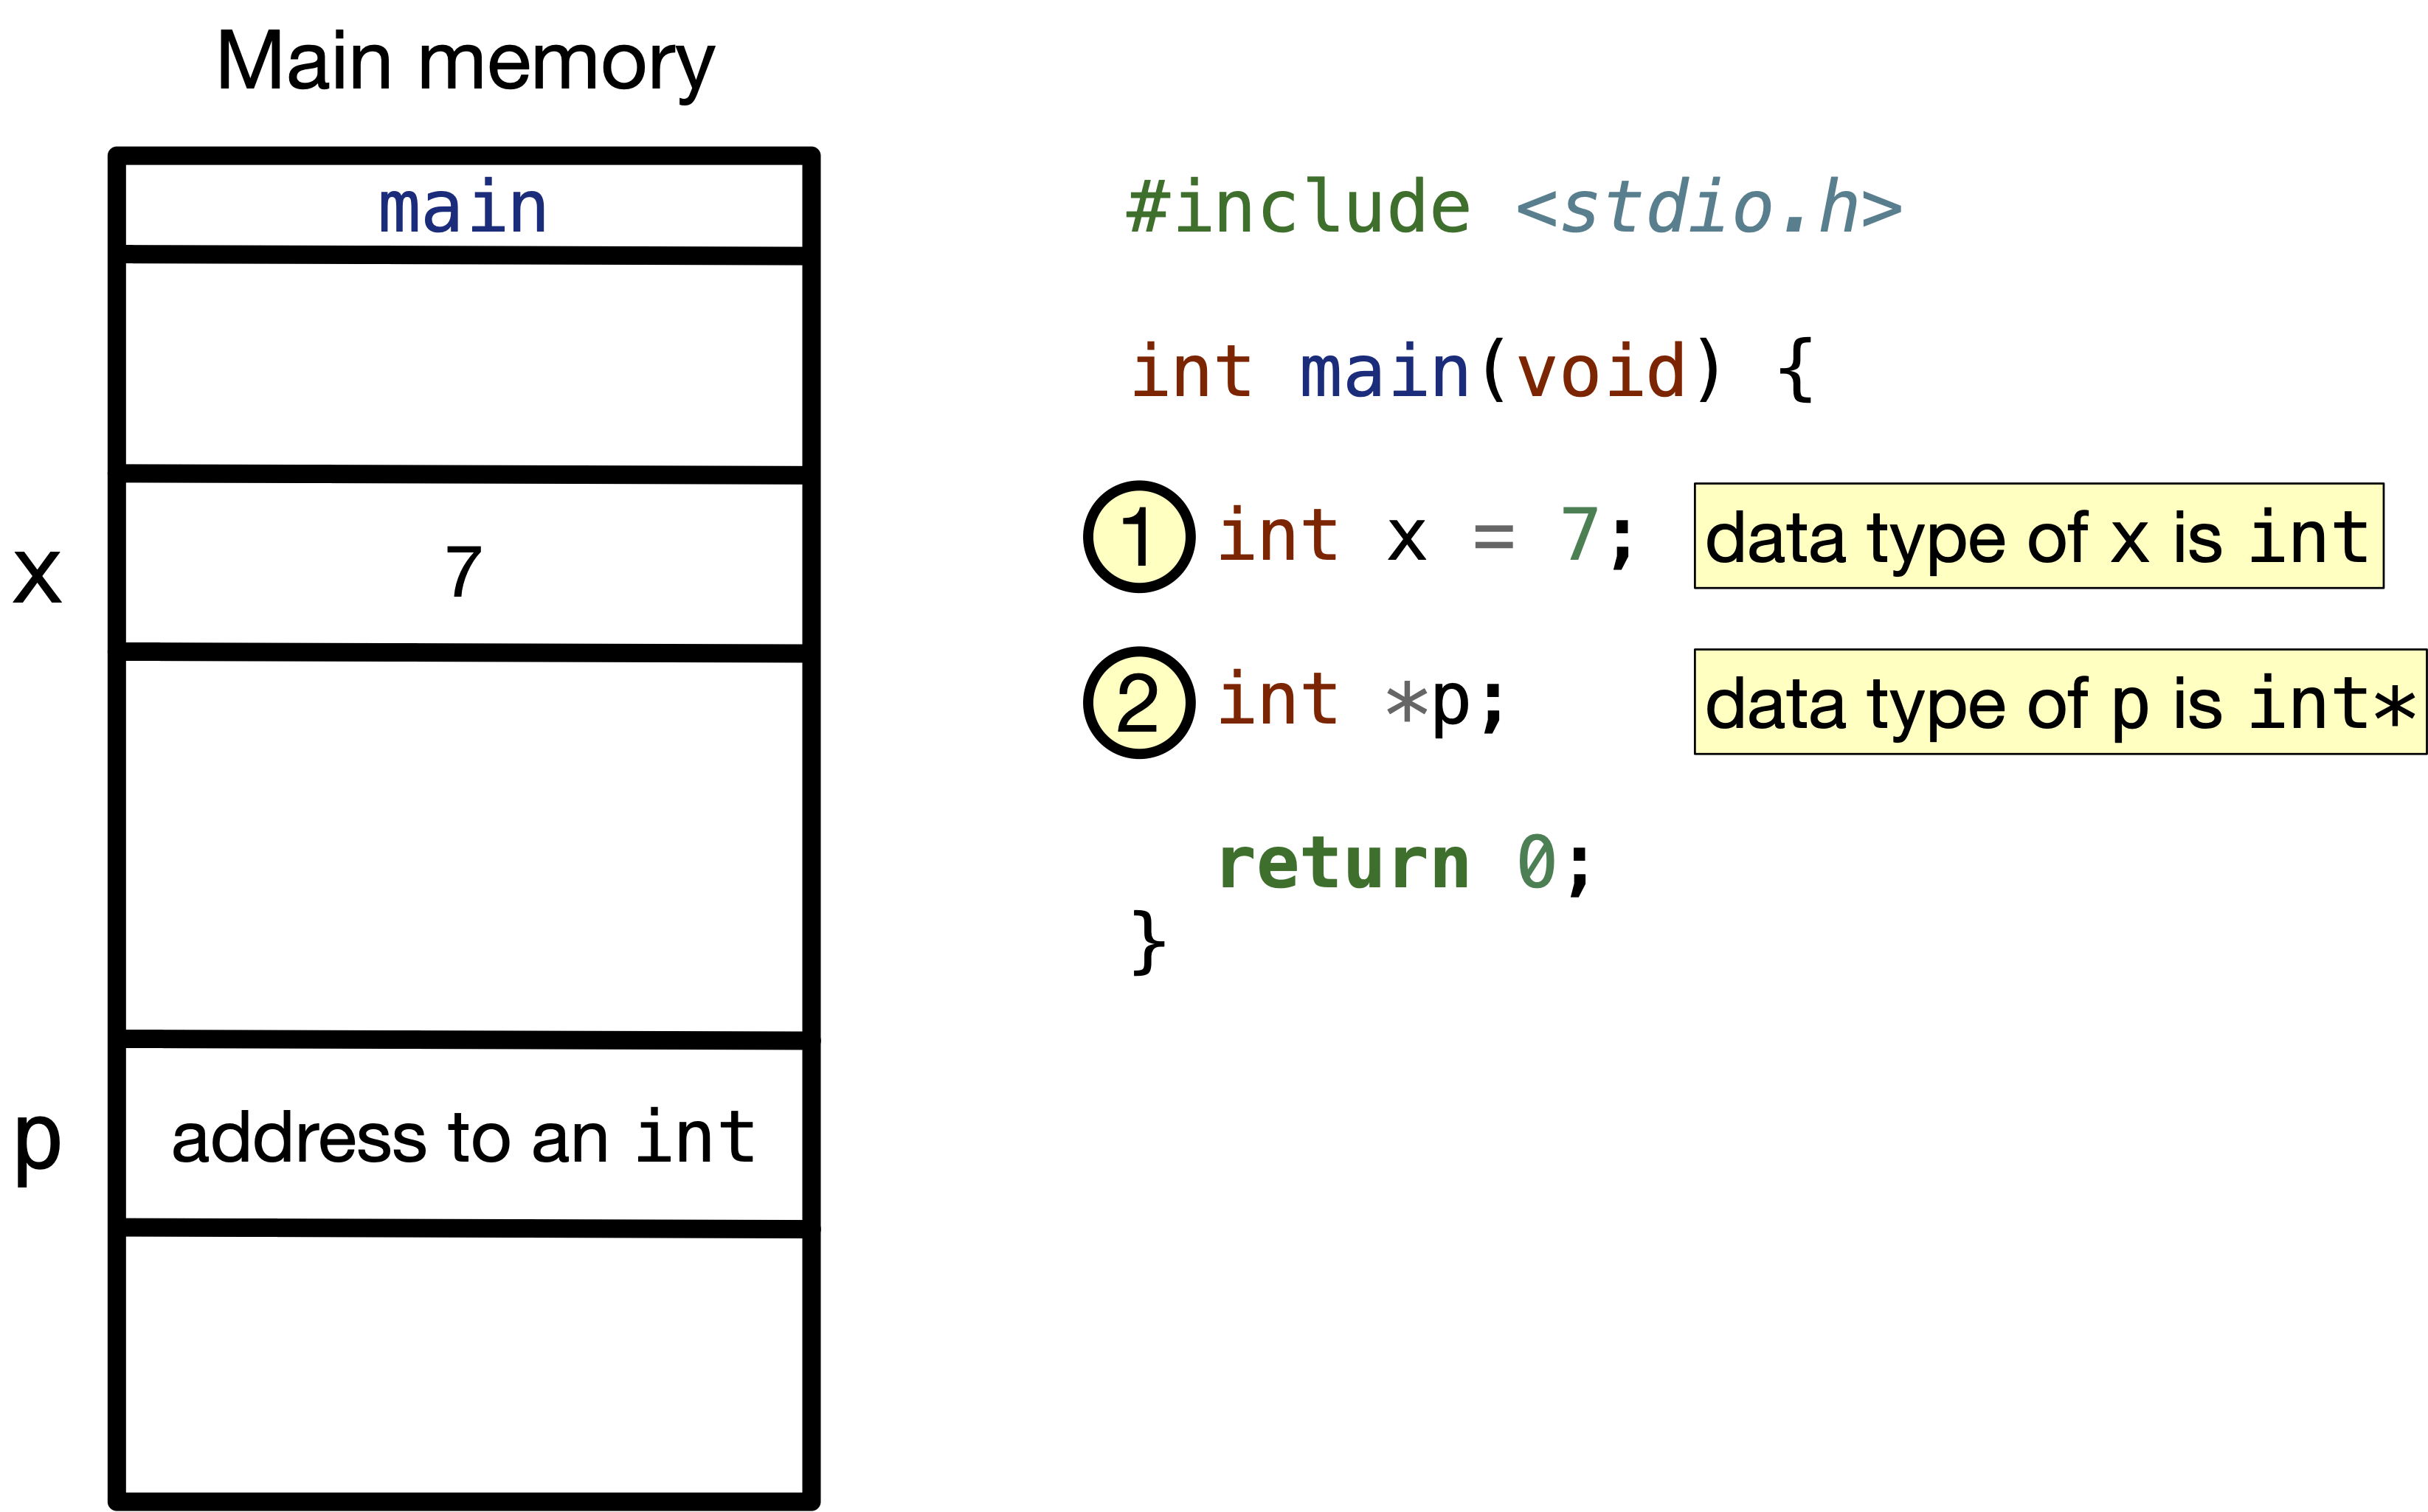 int and pointer to int variables in code and memory.